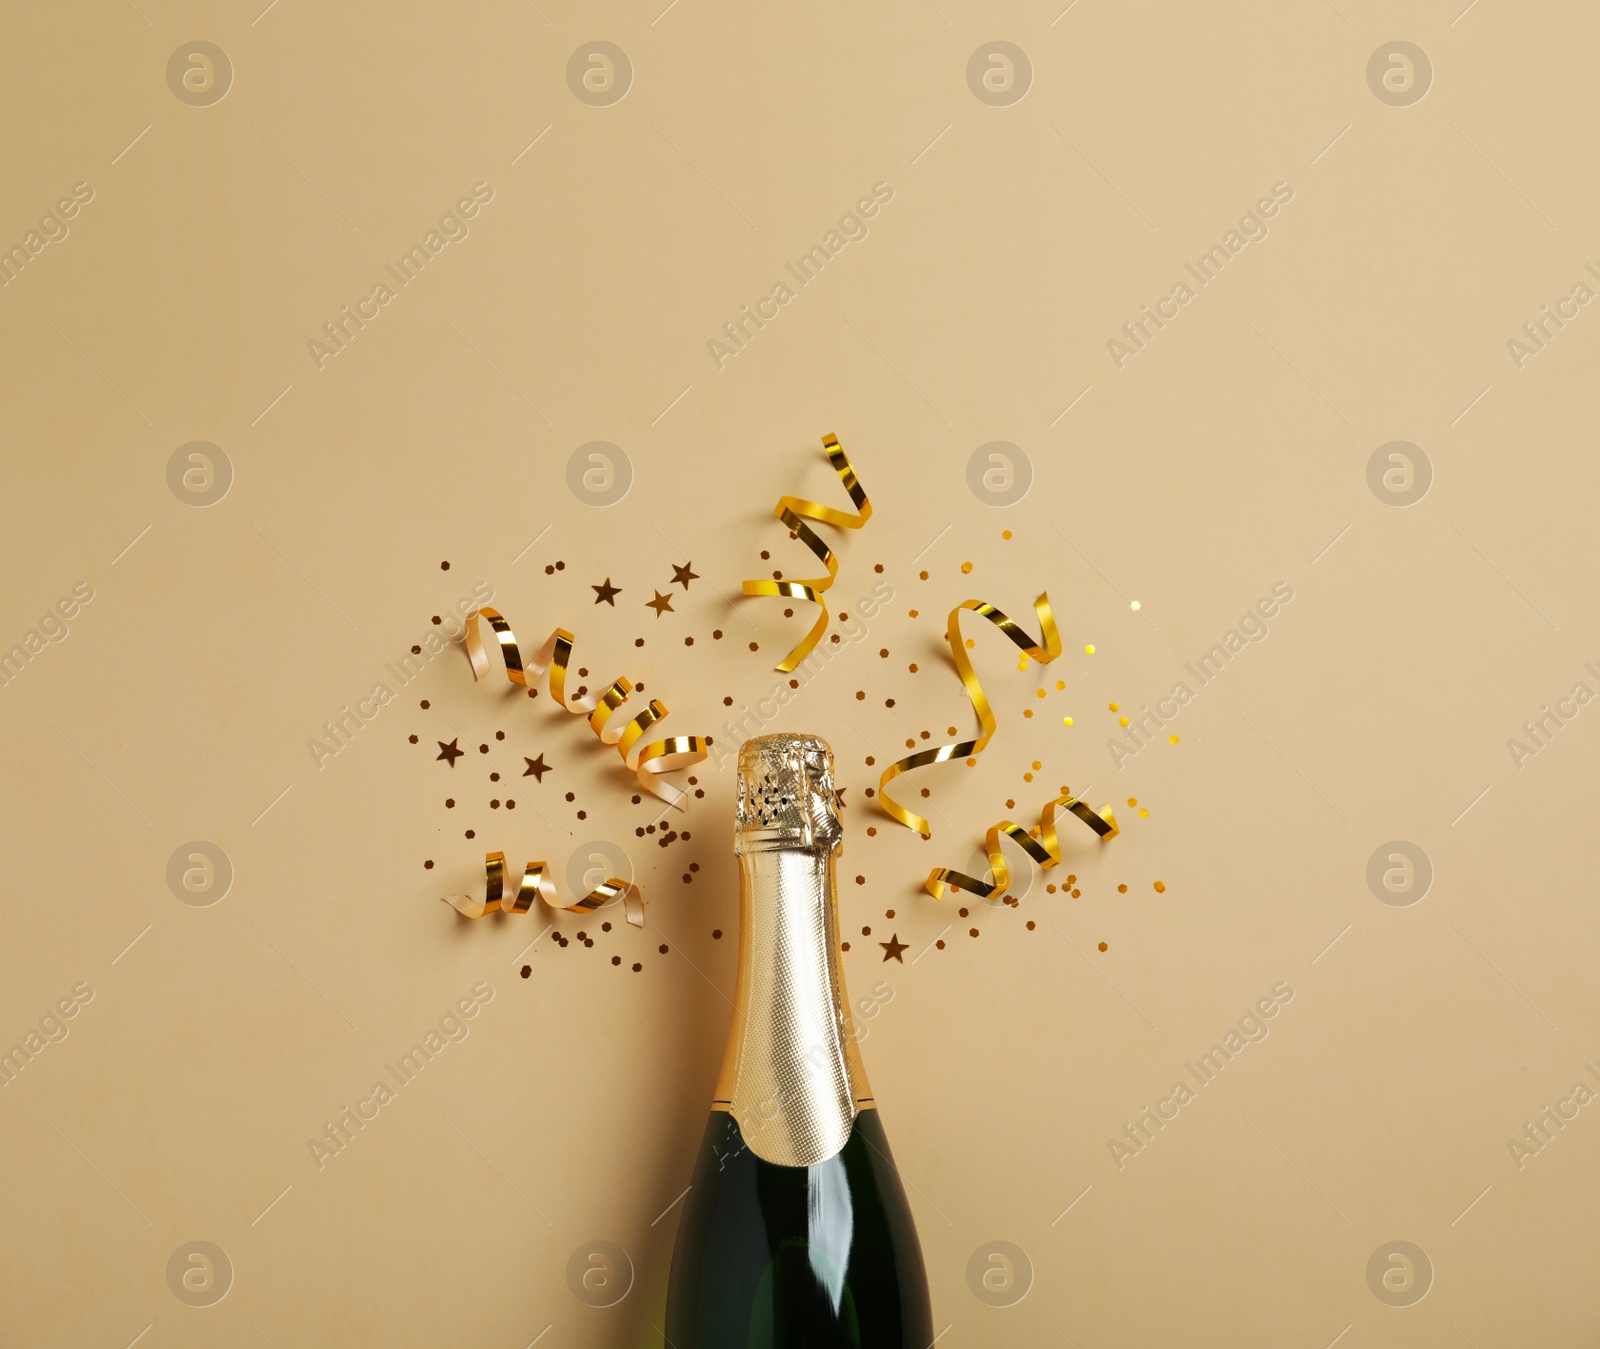 Photo of Bottle of champagne with gold glitter and confetti on beige background, flat lay. Hilarious celebration